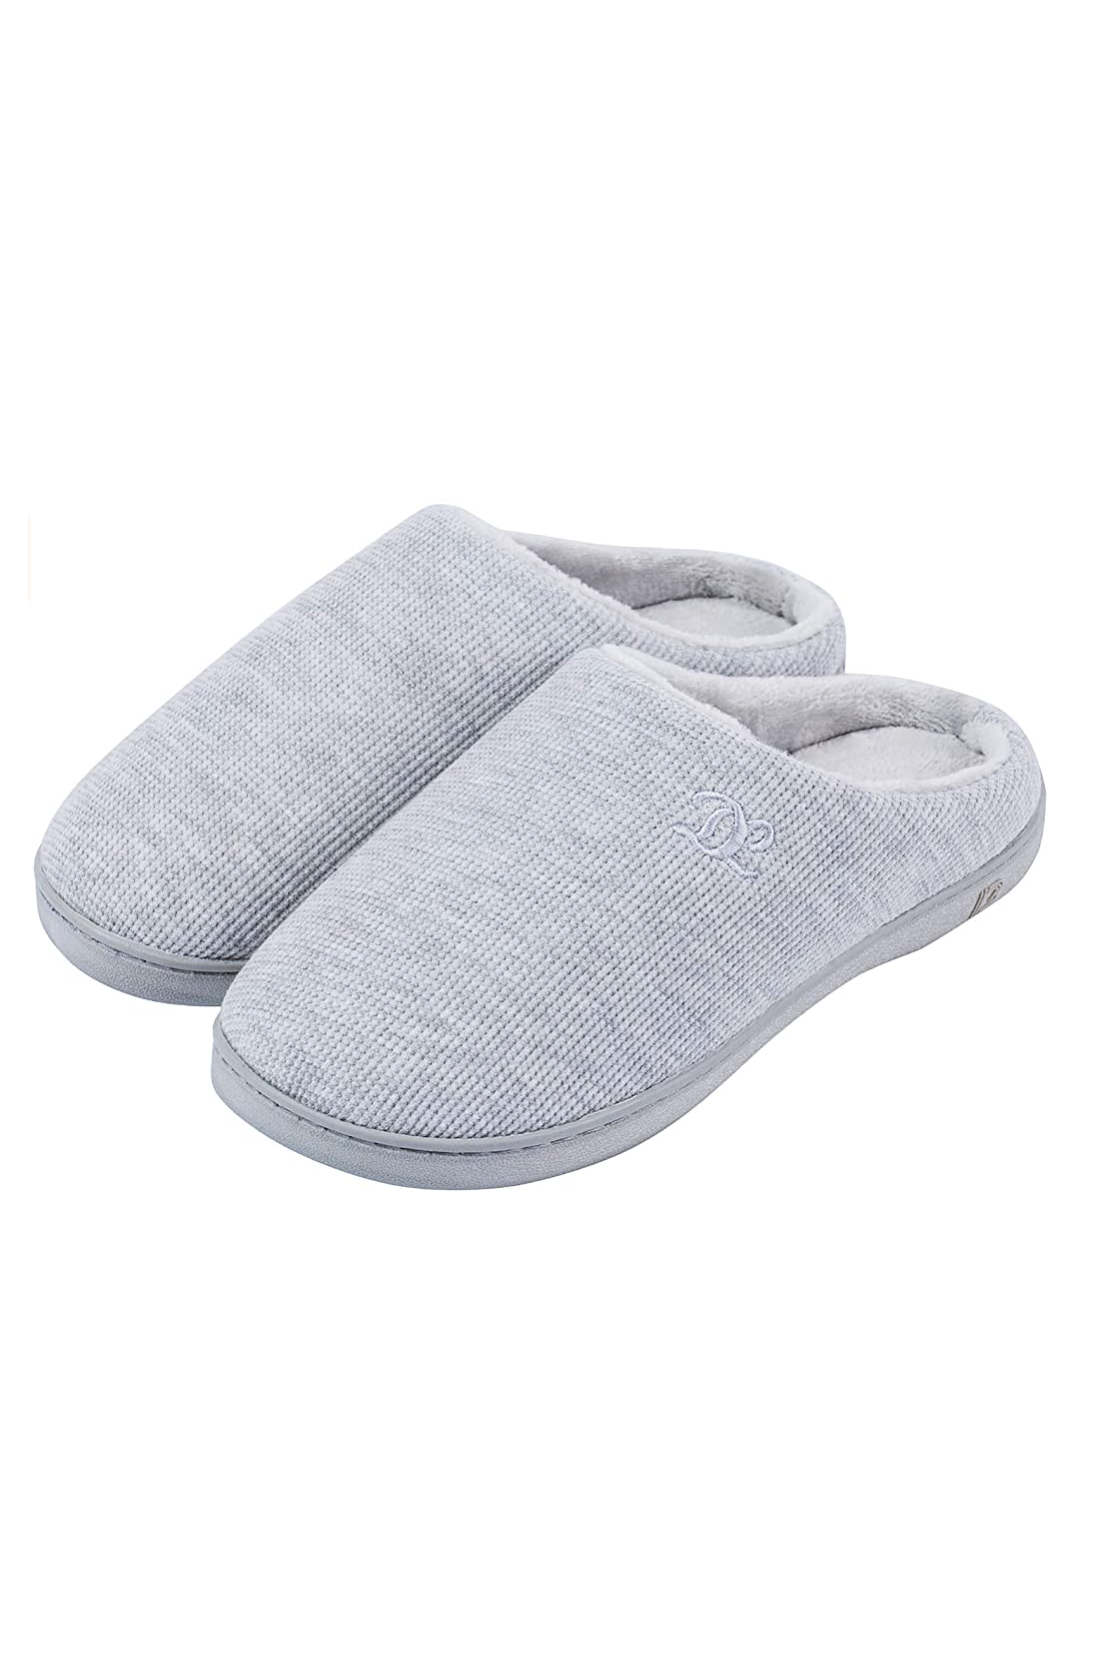 best house slippers on amazon